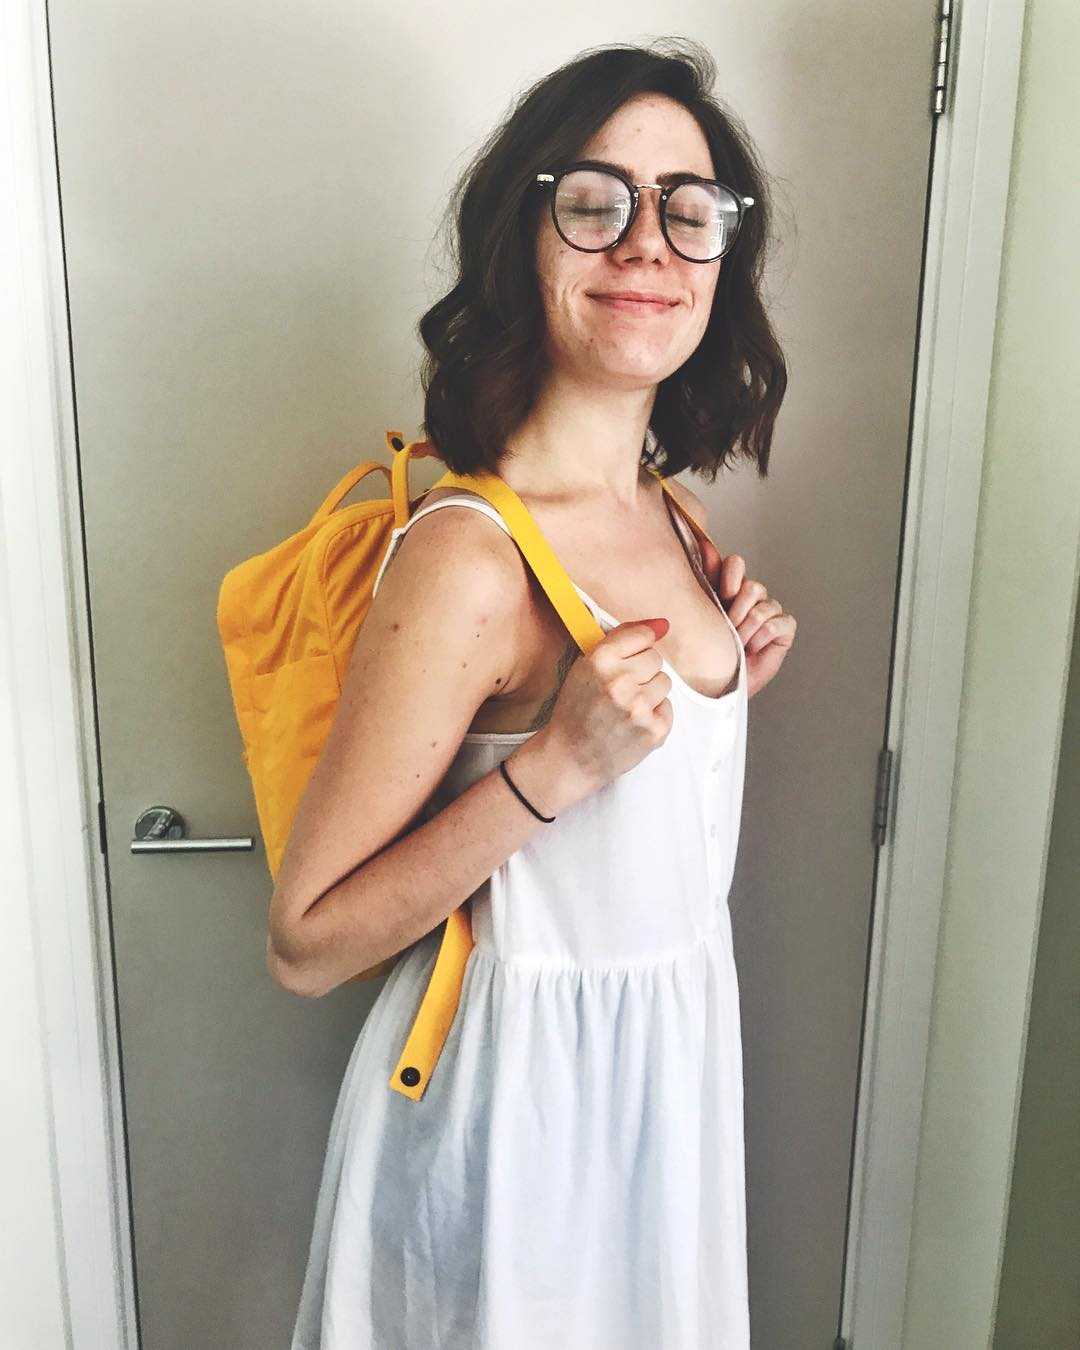 51 Hottest Dodie Big Butt Pictures Demonstrate That She Has Most Sweltering Legs 591